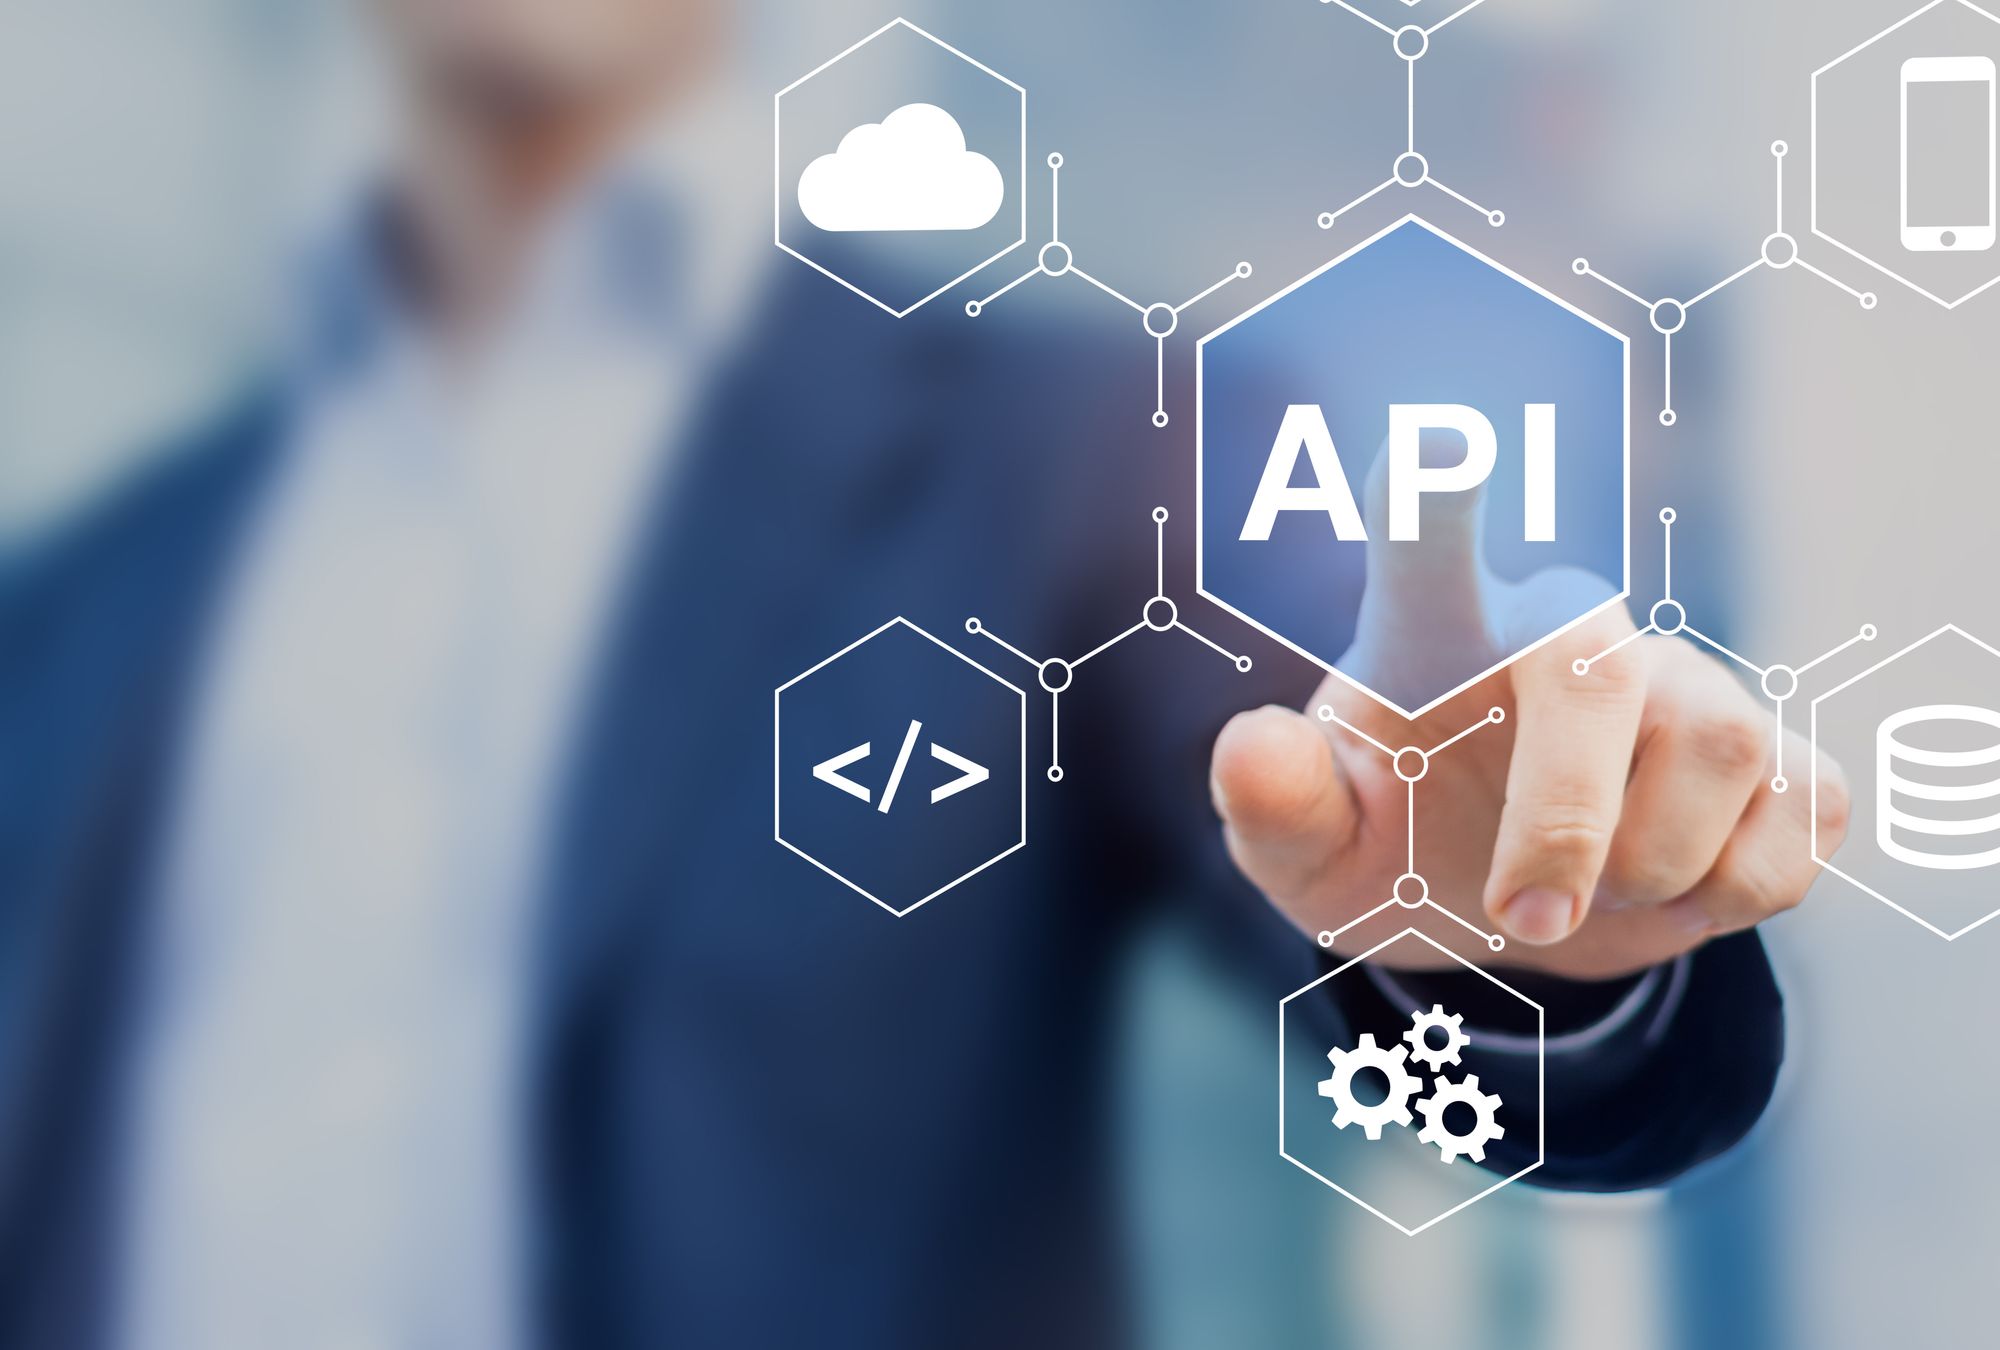 API Security: 5 tips to ensure third party API security in your organization